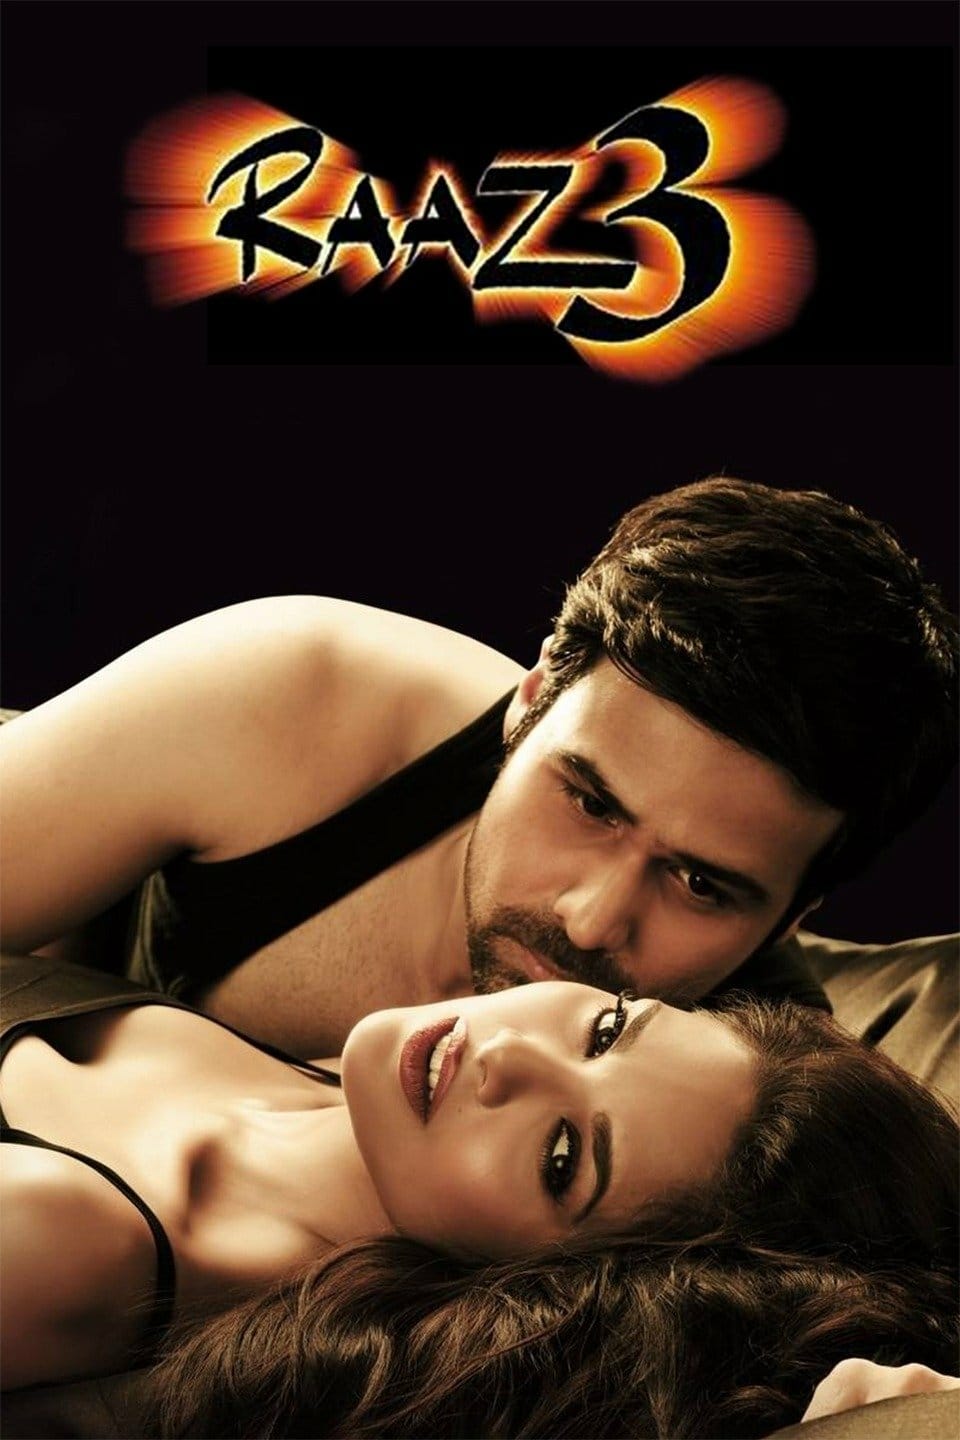 Poster for the movie "Raaz 3"